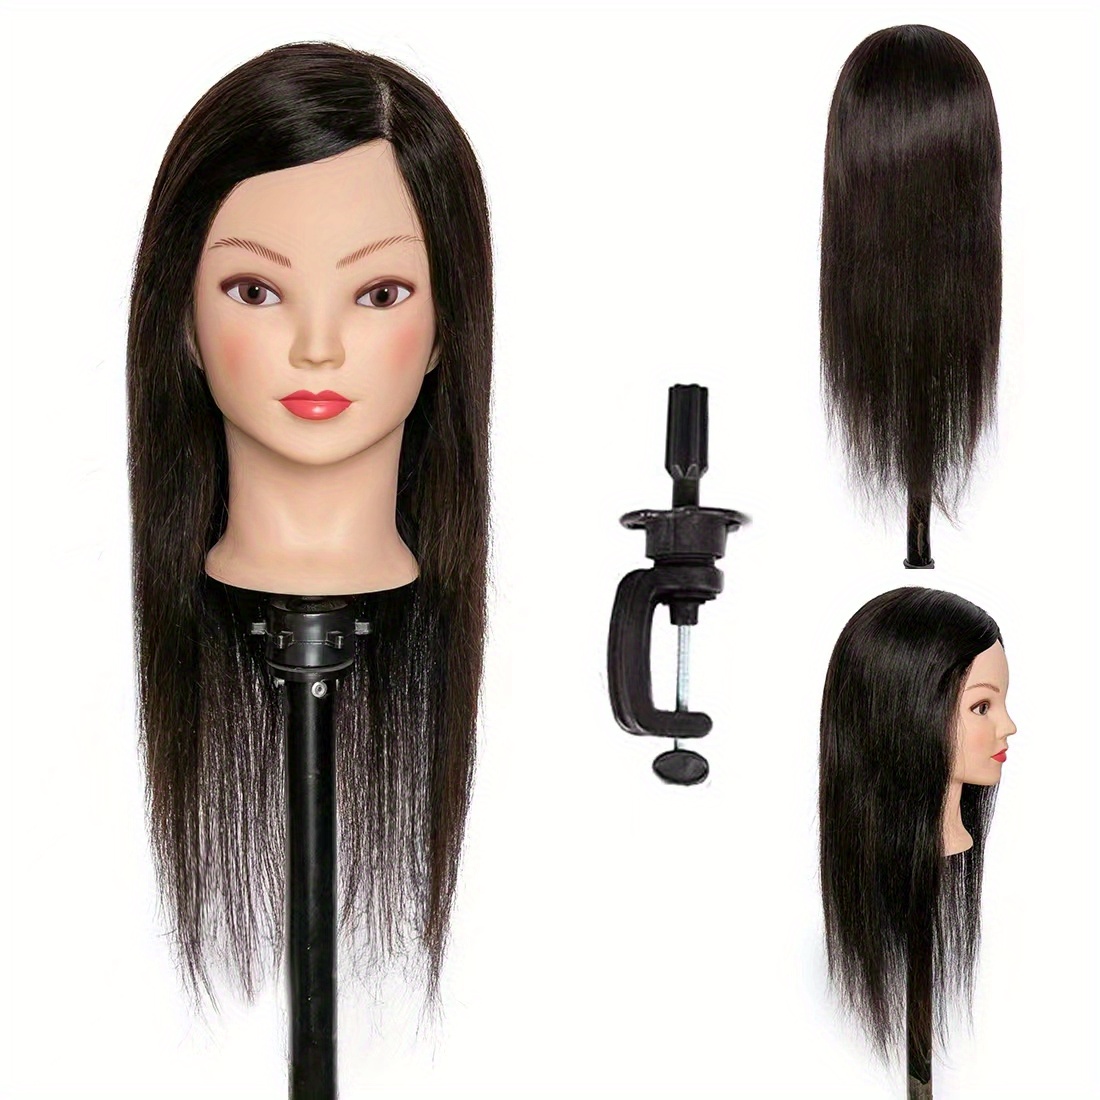 100% Salon Real Human Hair Training Head Hairdressing Practice Mannequin  Doll